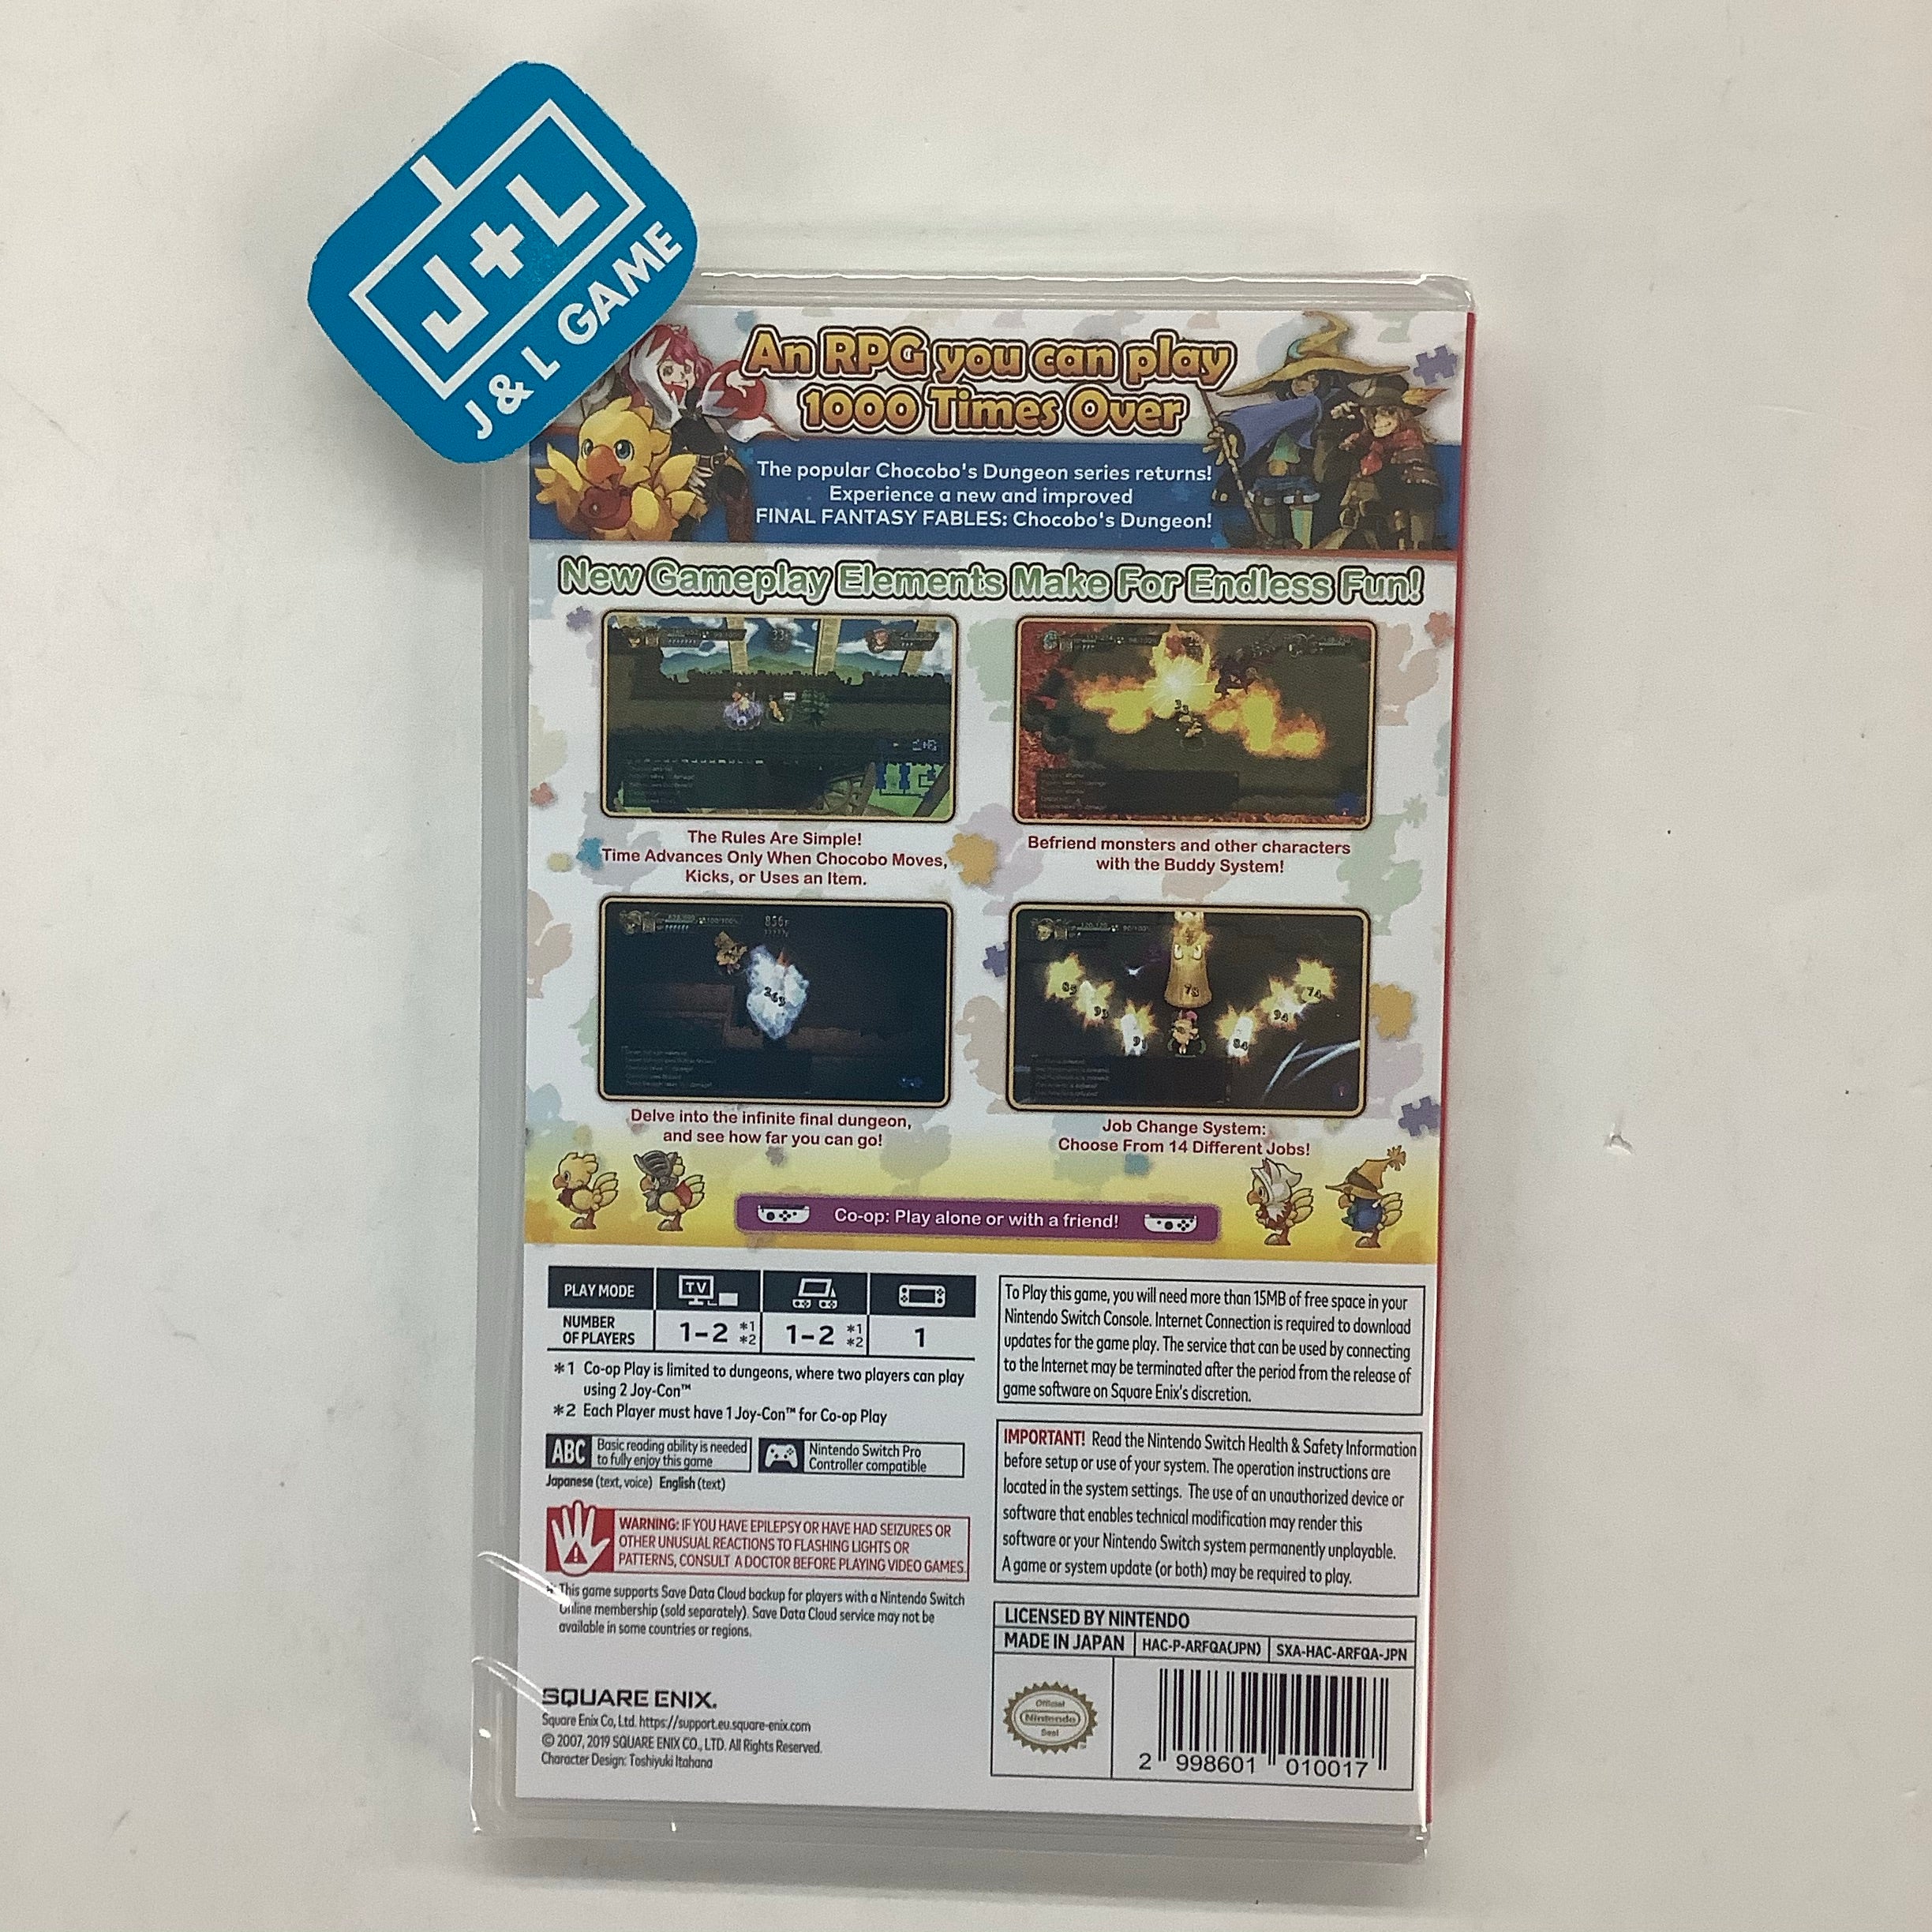 Chocobo's Mystery Dungeon EVERY BUDDY! - (NSW) Nintendo Switch (Japanese Import) Video Games Square Enix   